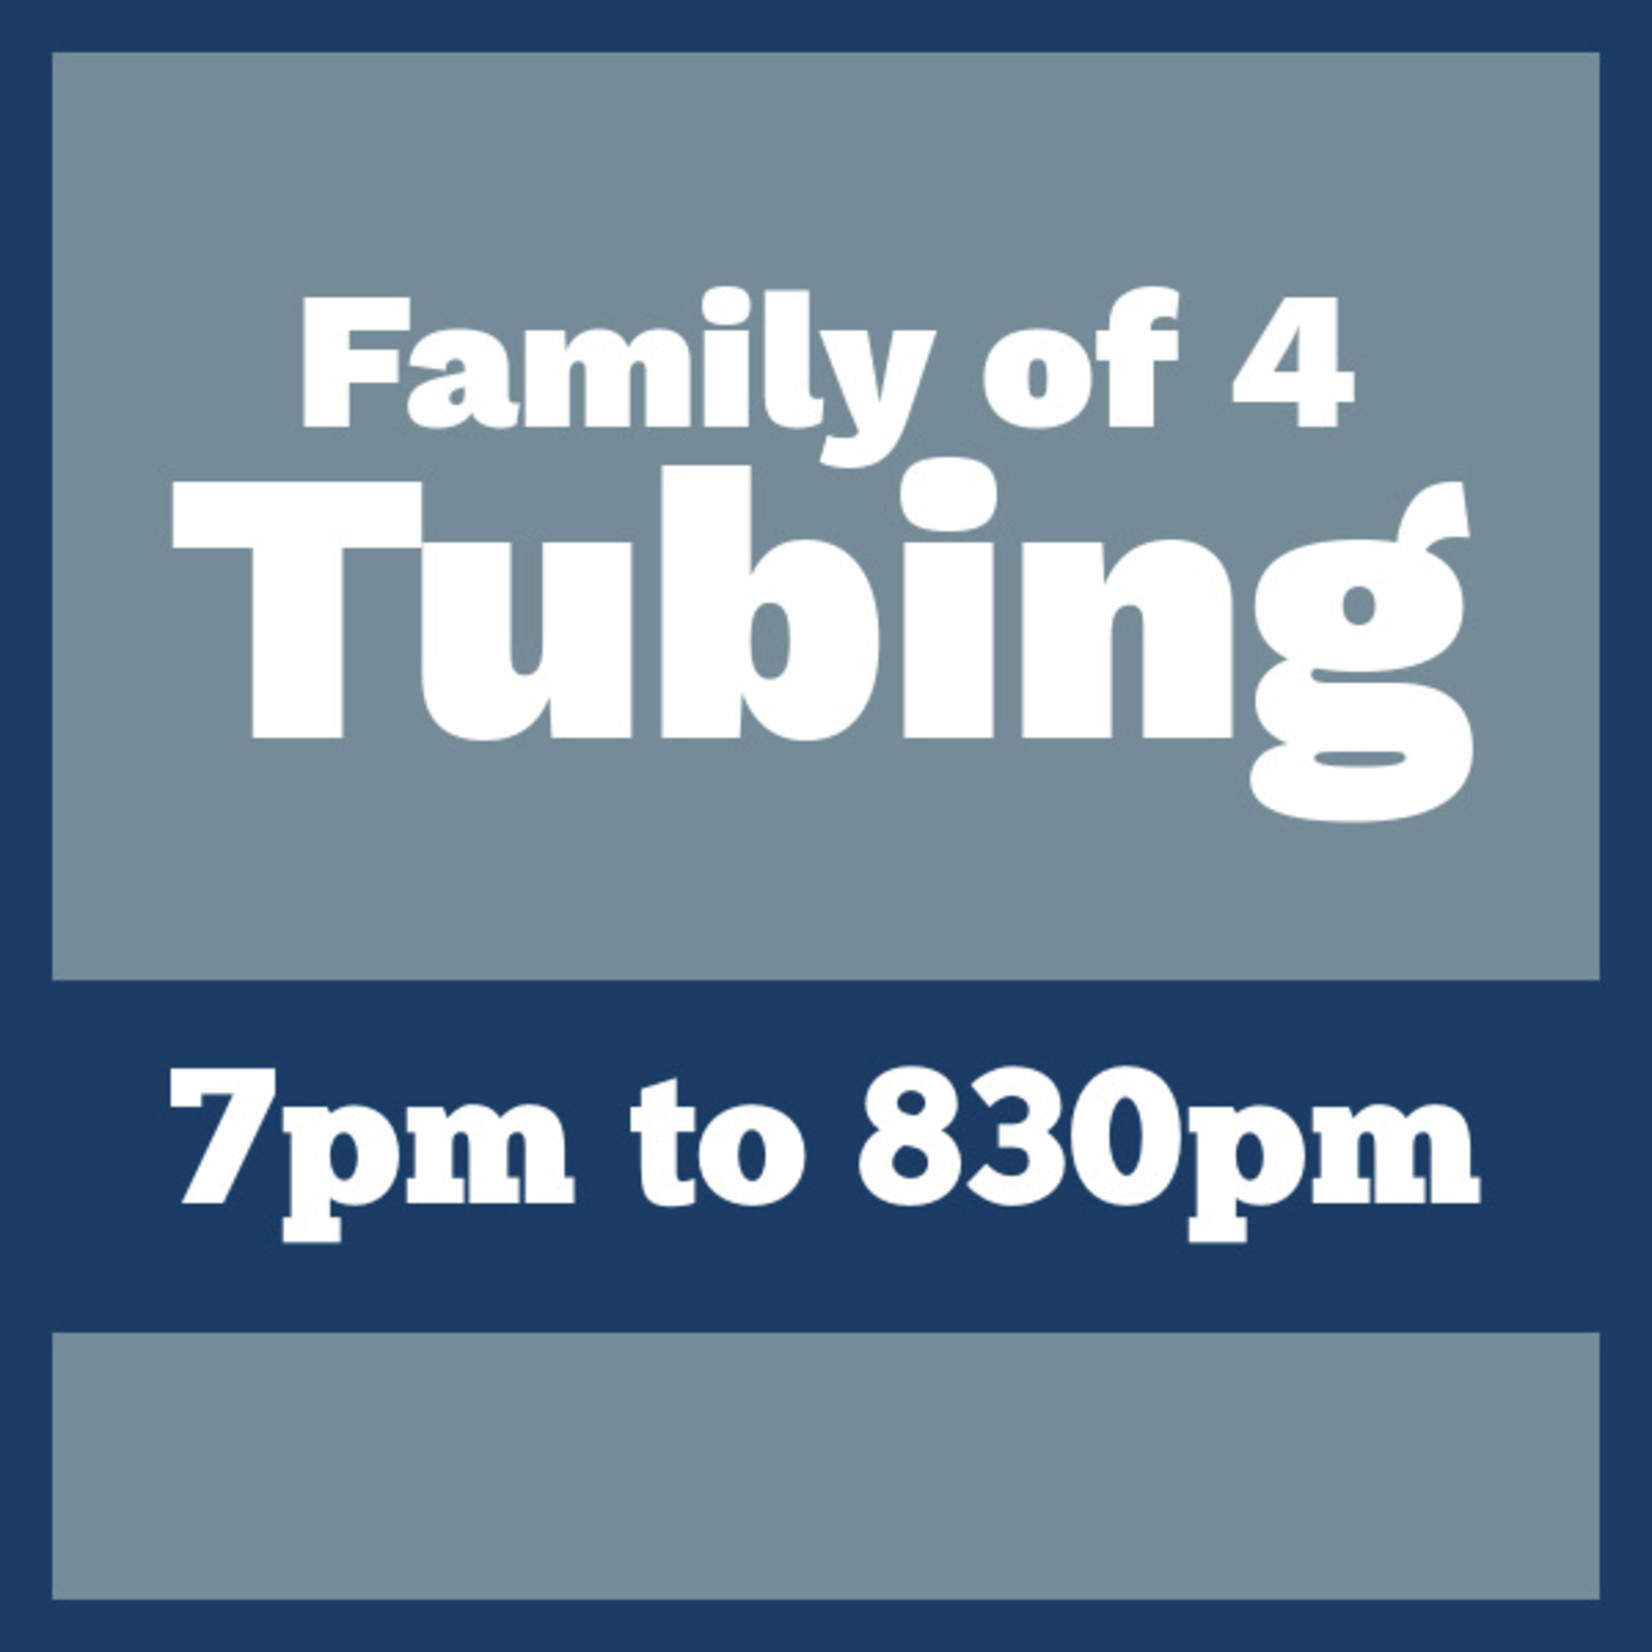 Tubing Pass FAMILY of 4 @ 7pm *valid only for Thu Mar 23rd